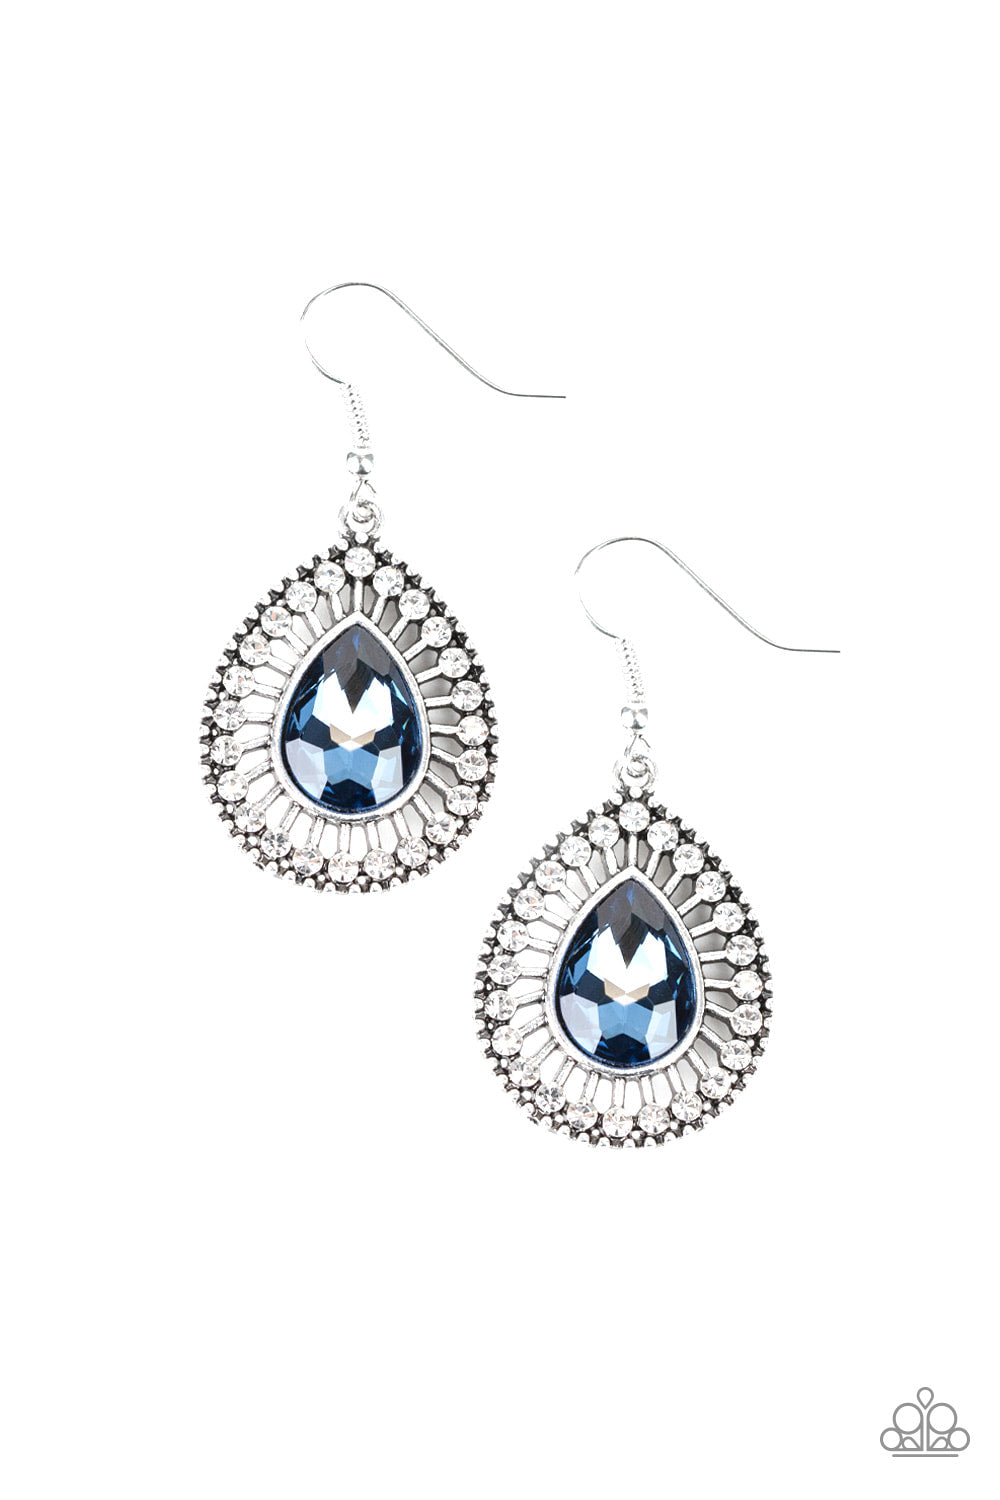 Limo Service - Blue - Earrings - Paparazzi Accessories